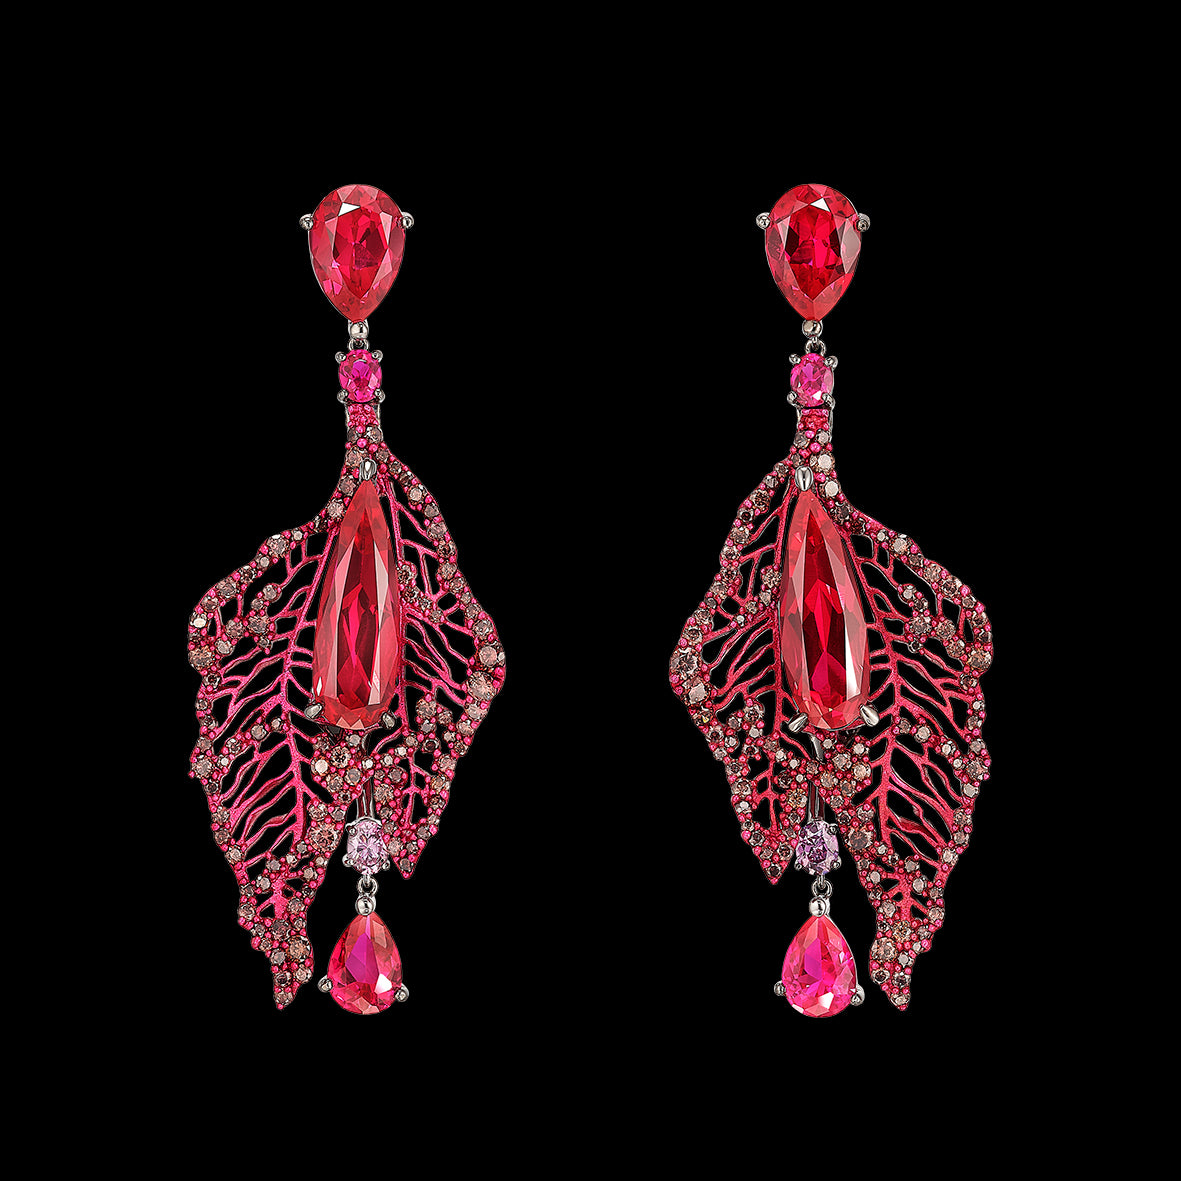 Ruby Atlantis Drop Earrings, Earring, Anabela Chan Joaillerie - Fine jewelry with laboratory grown and created gemstones hand-crafted in the United Kingdom. Anabela Chan Joaillerie is the first fine jewellery brand in the world to champion laboratory-grown and created gemstones with high jewellery design, artisanal craftsmanship and a focus on ethical and sustainable innovations.